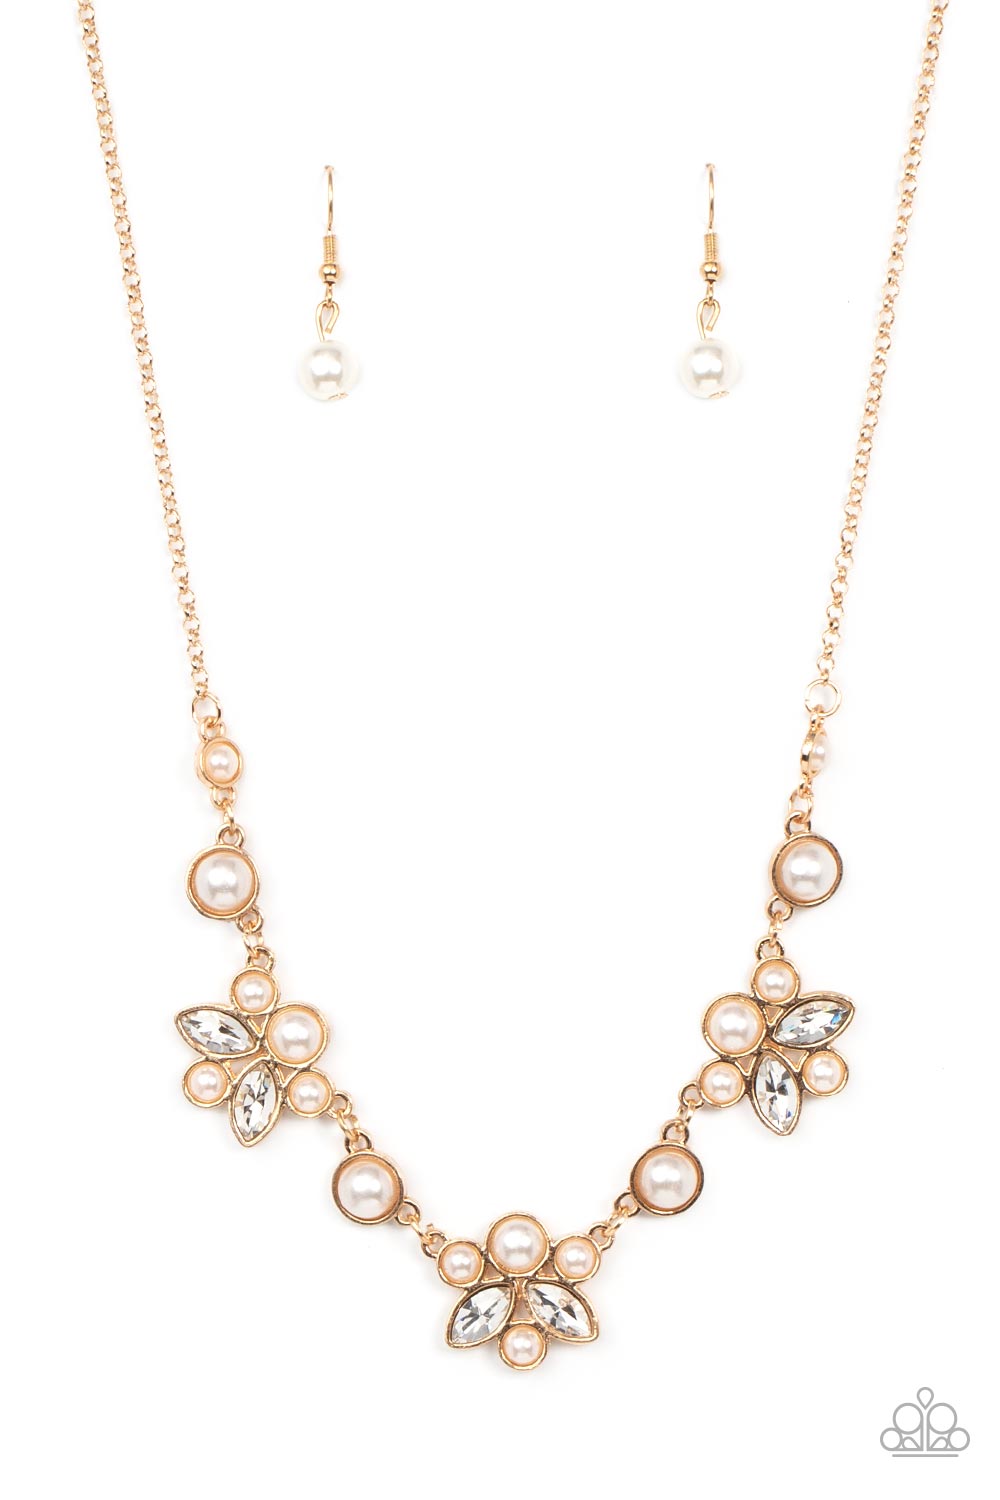 Royally Ever After - Gold necklace B072